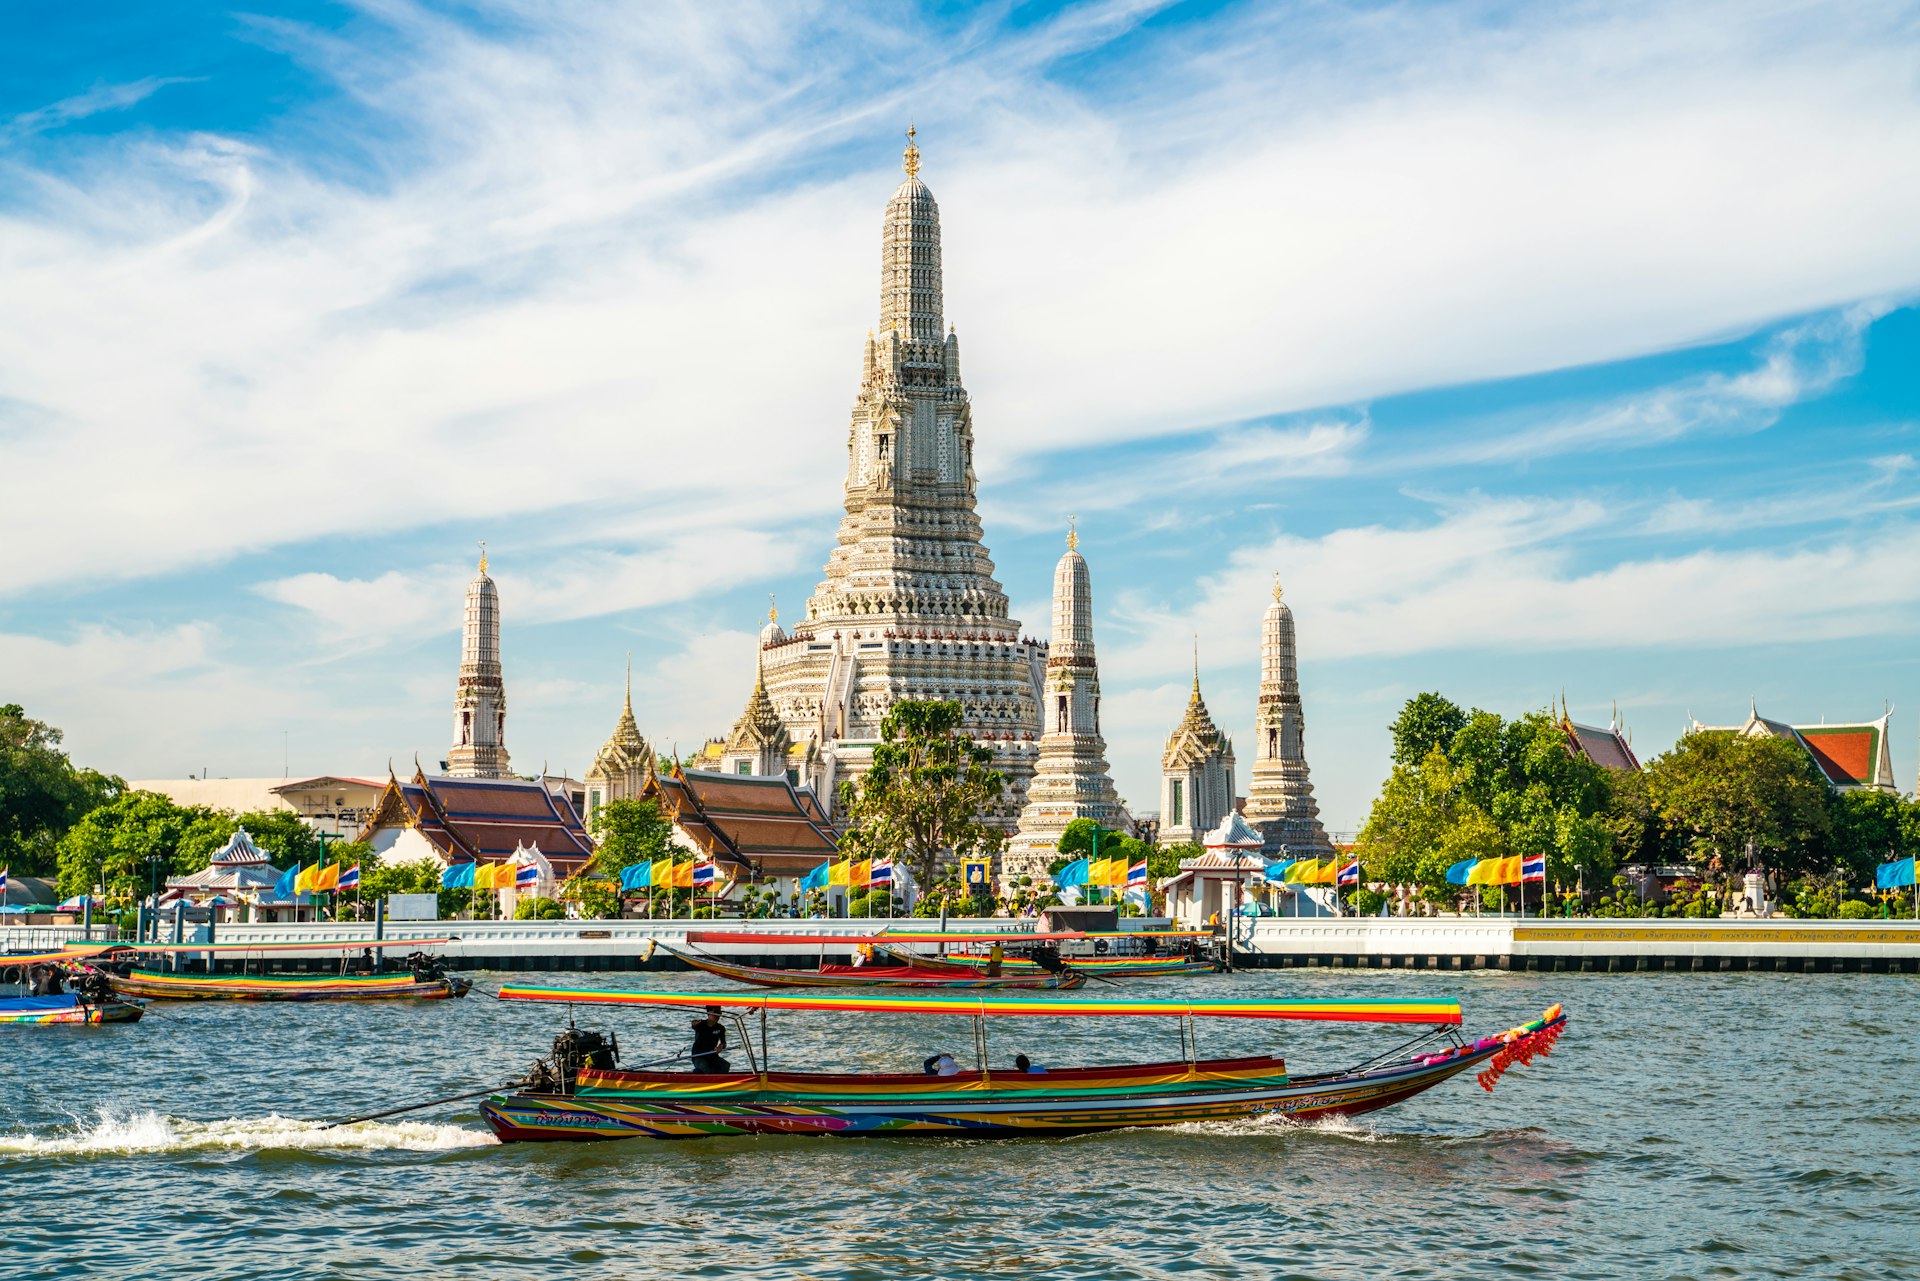 The temple of Wat Arun at dawn with a boat blue on a sunny day in Bangkok, Thailand.